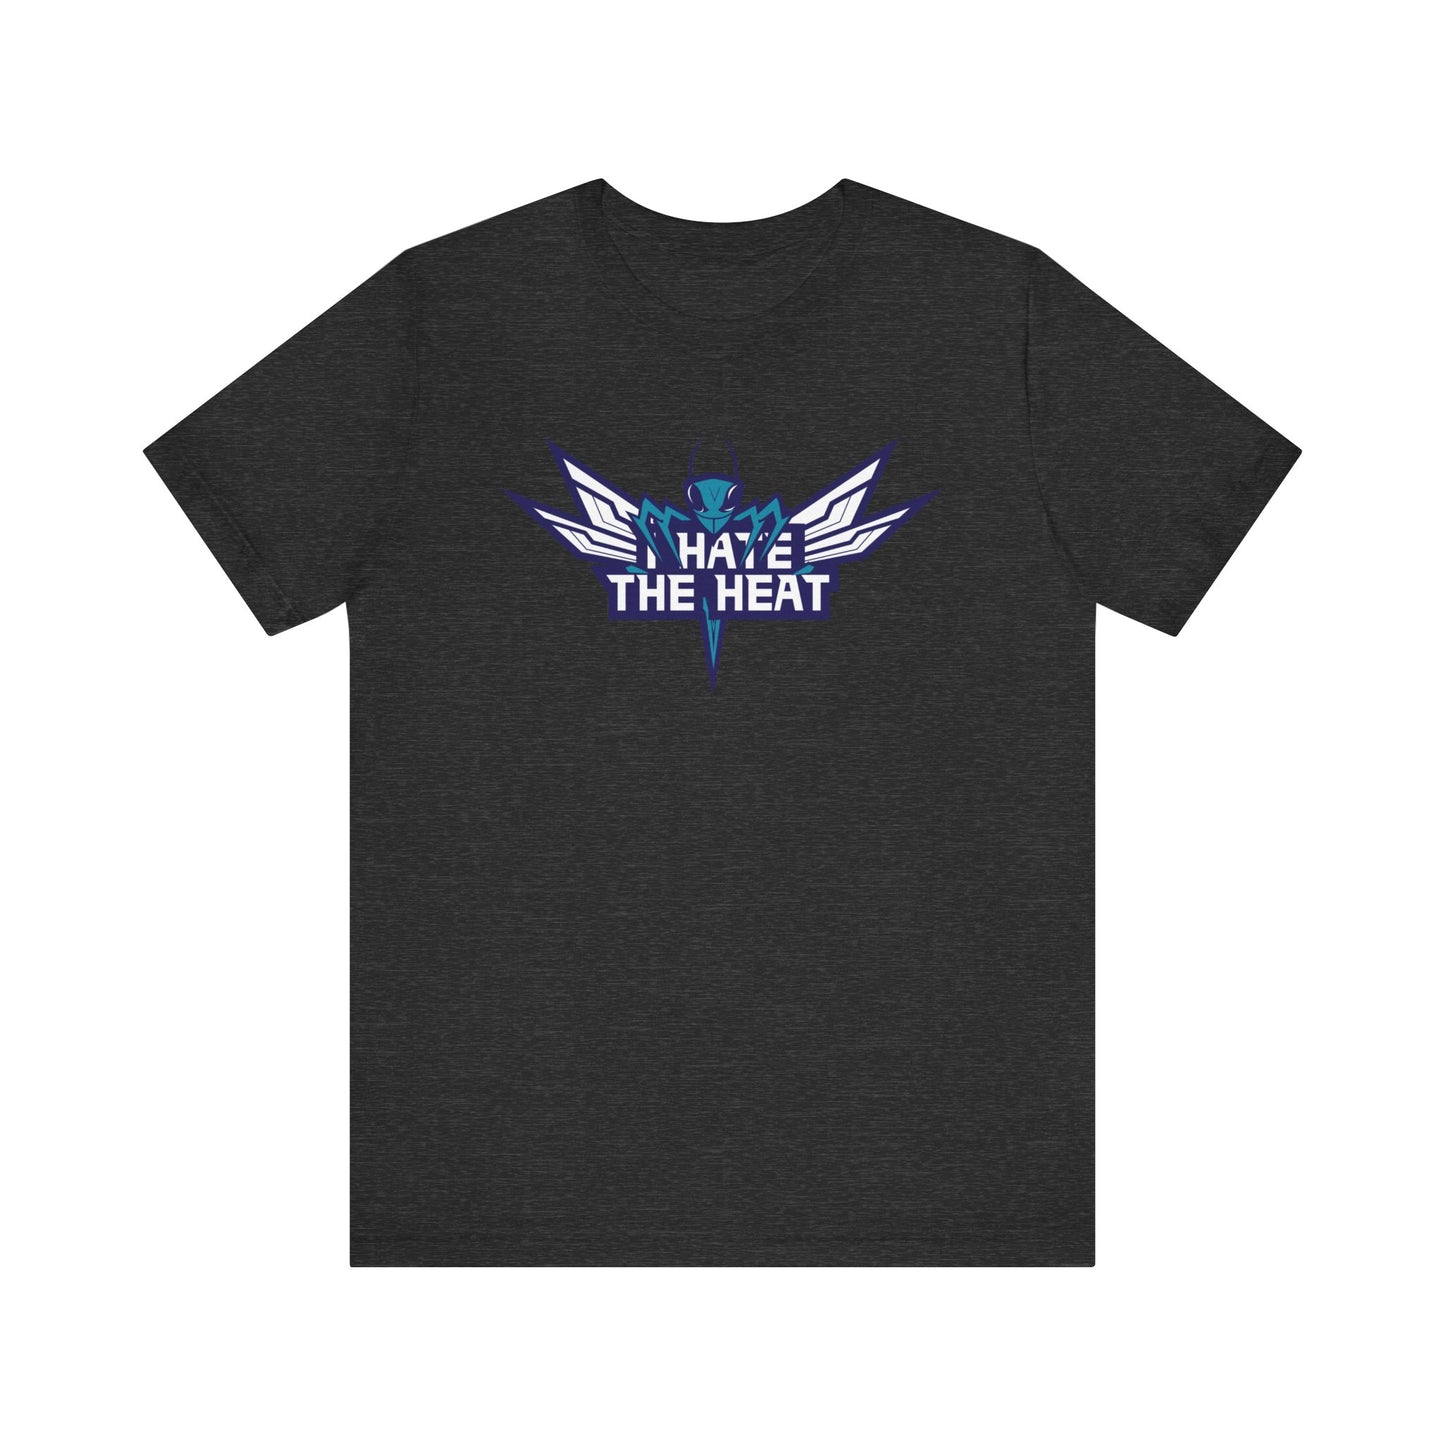 I Hate The Heat (for Charlotte fans) - Unisex Jersey Short Sleeve Tee